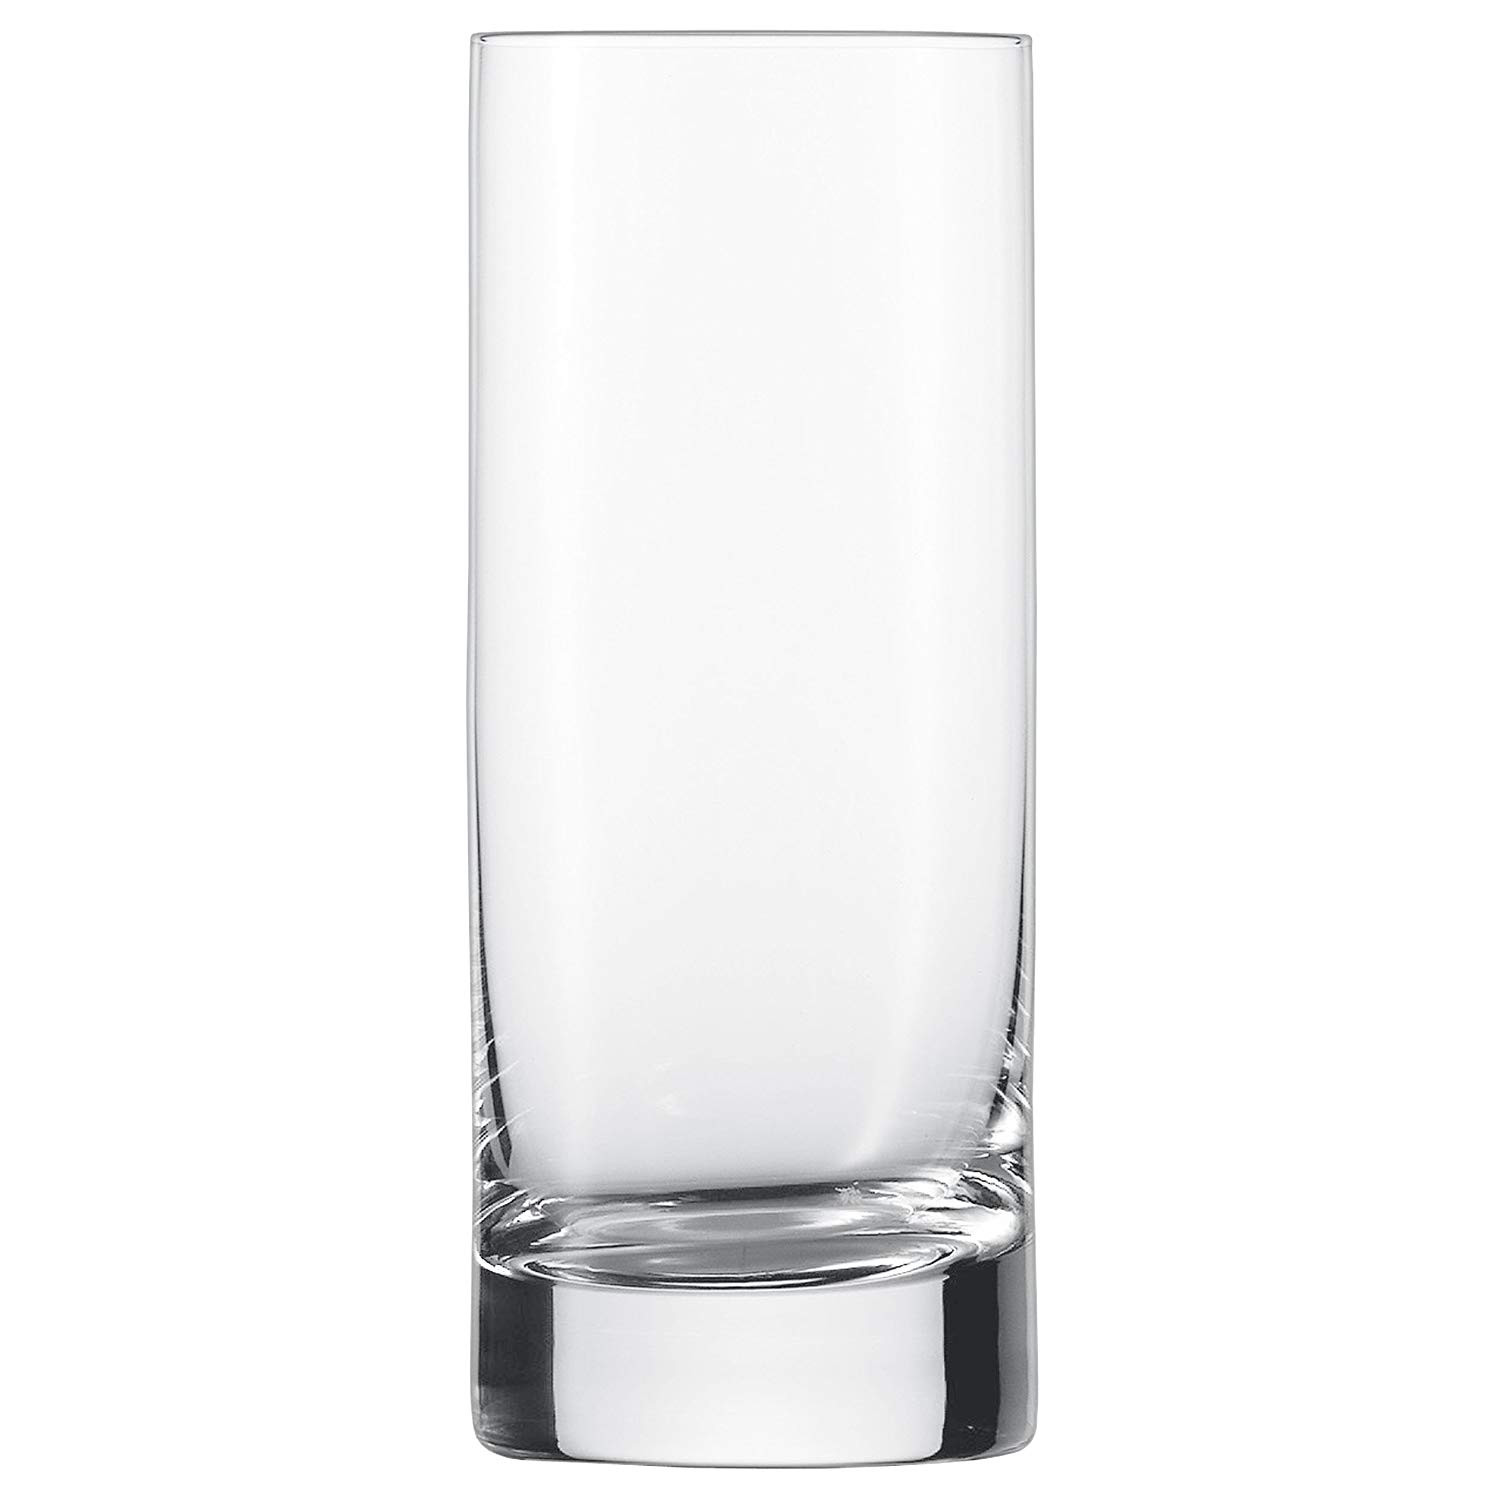 13 Popular Heavy Cut Glass Vase 2024 free download heavy cut glass vase of amazon com schott zwiesel tritan crystal glass paris barware intended for amazon com schott zwiesel tritan crystal glass paris barware collection collins long drink c